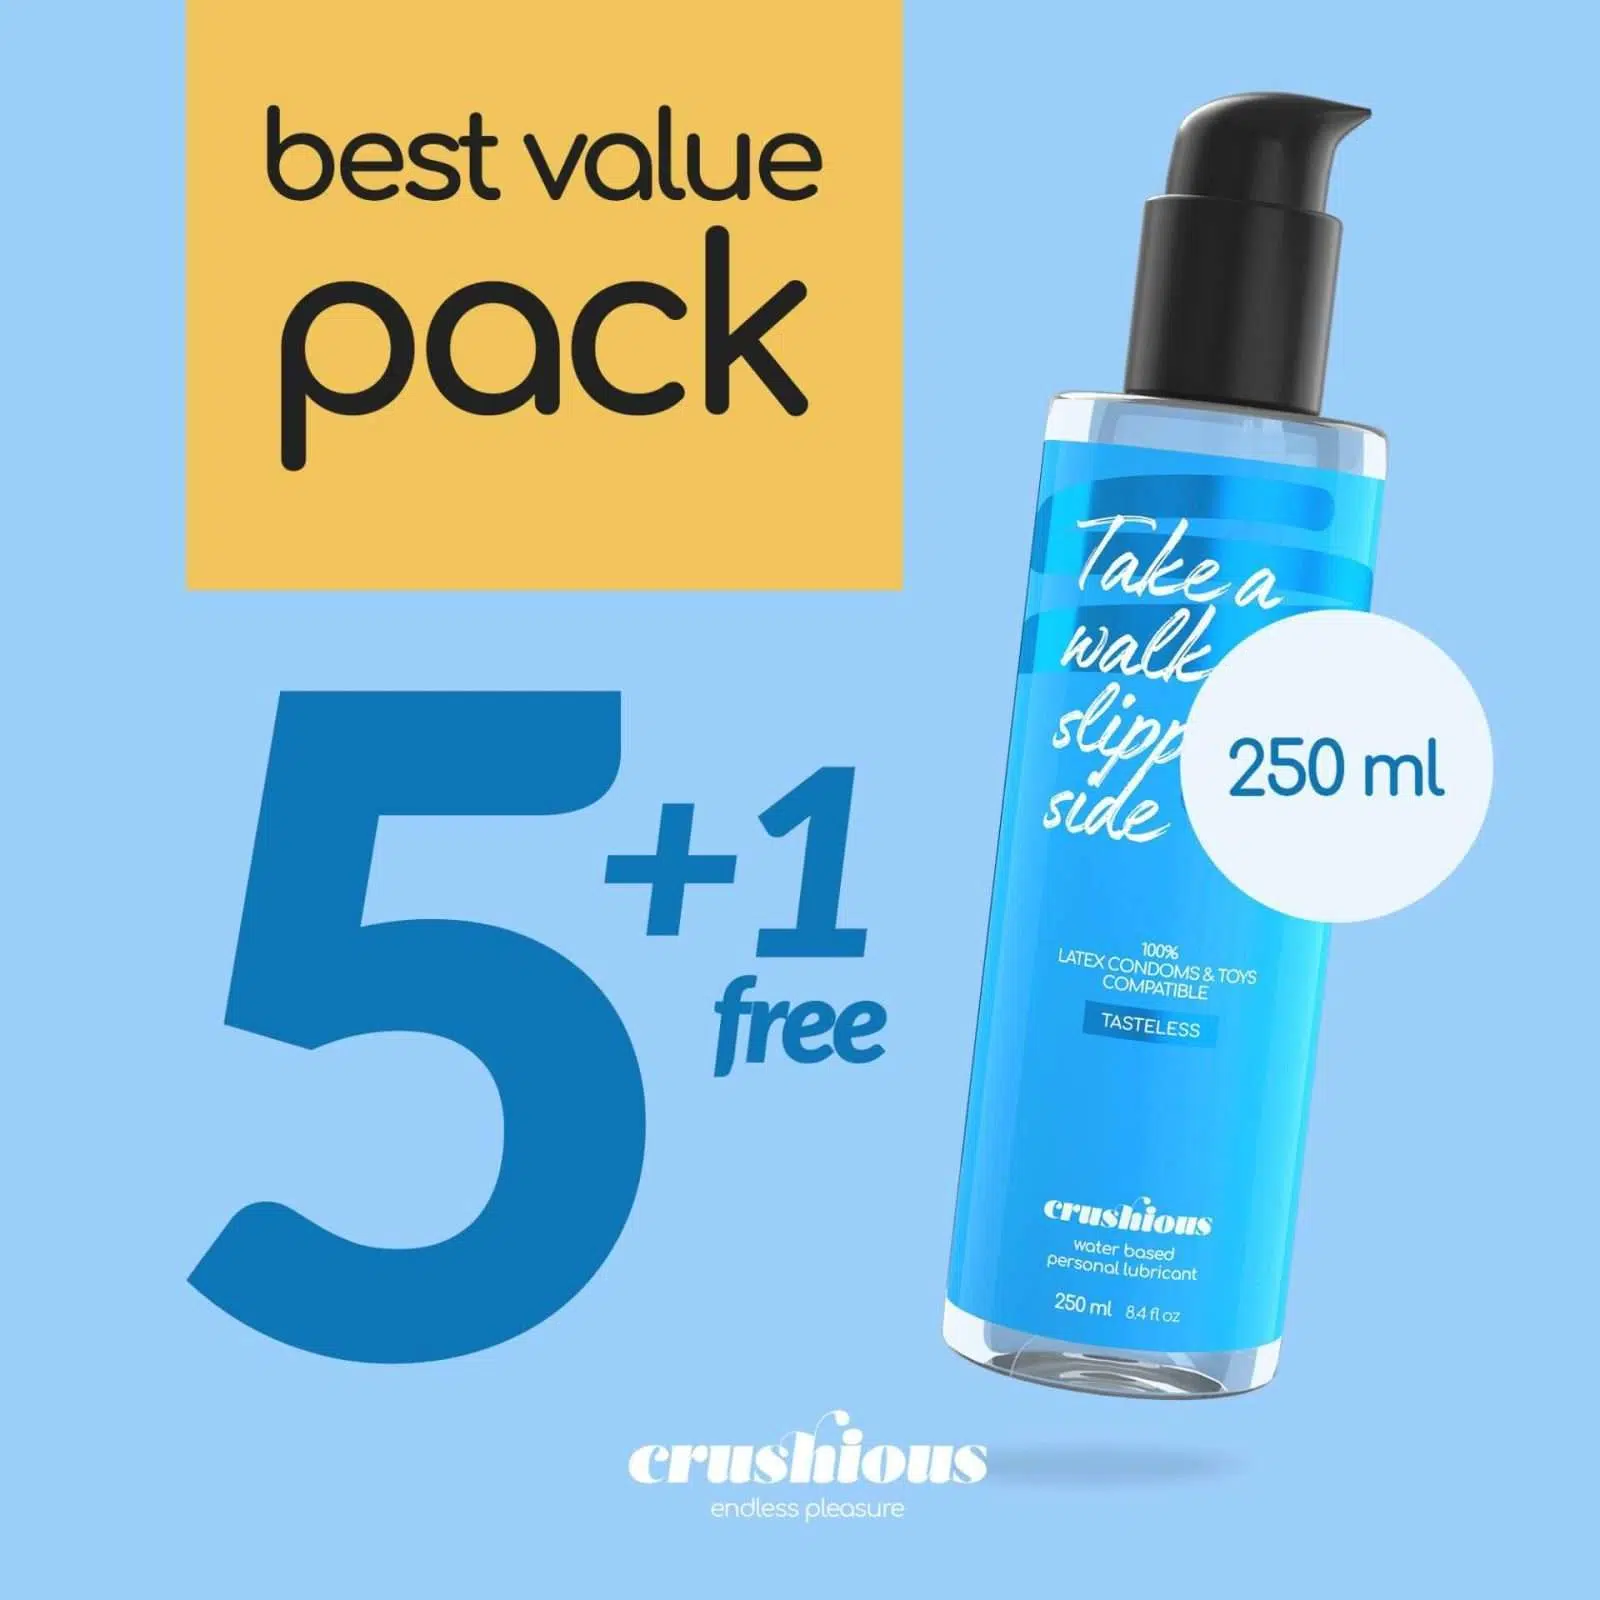 PACK OF 5 CRUSHIOUS WATERBASED LUBRICANT 250 ML   1 FREE